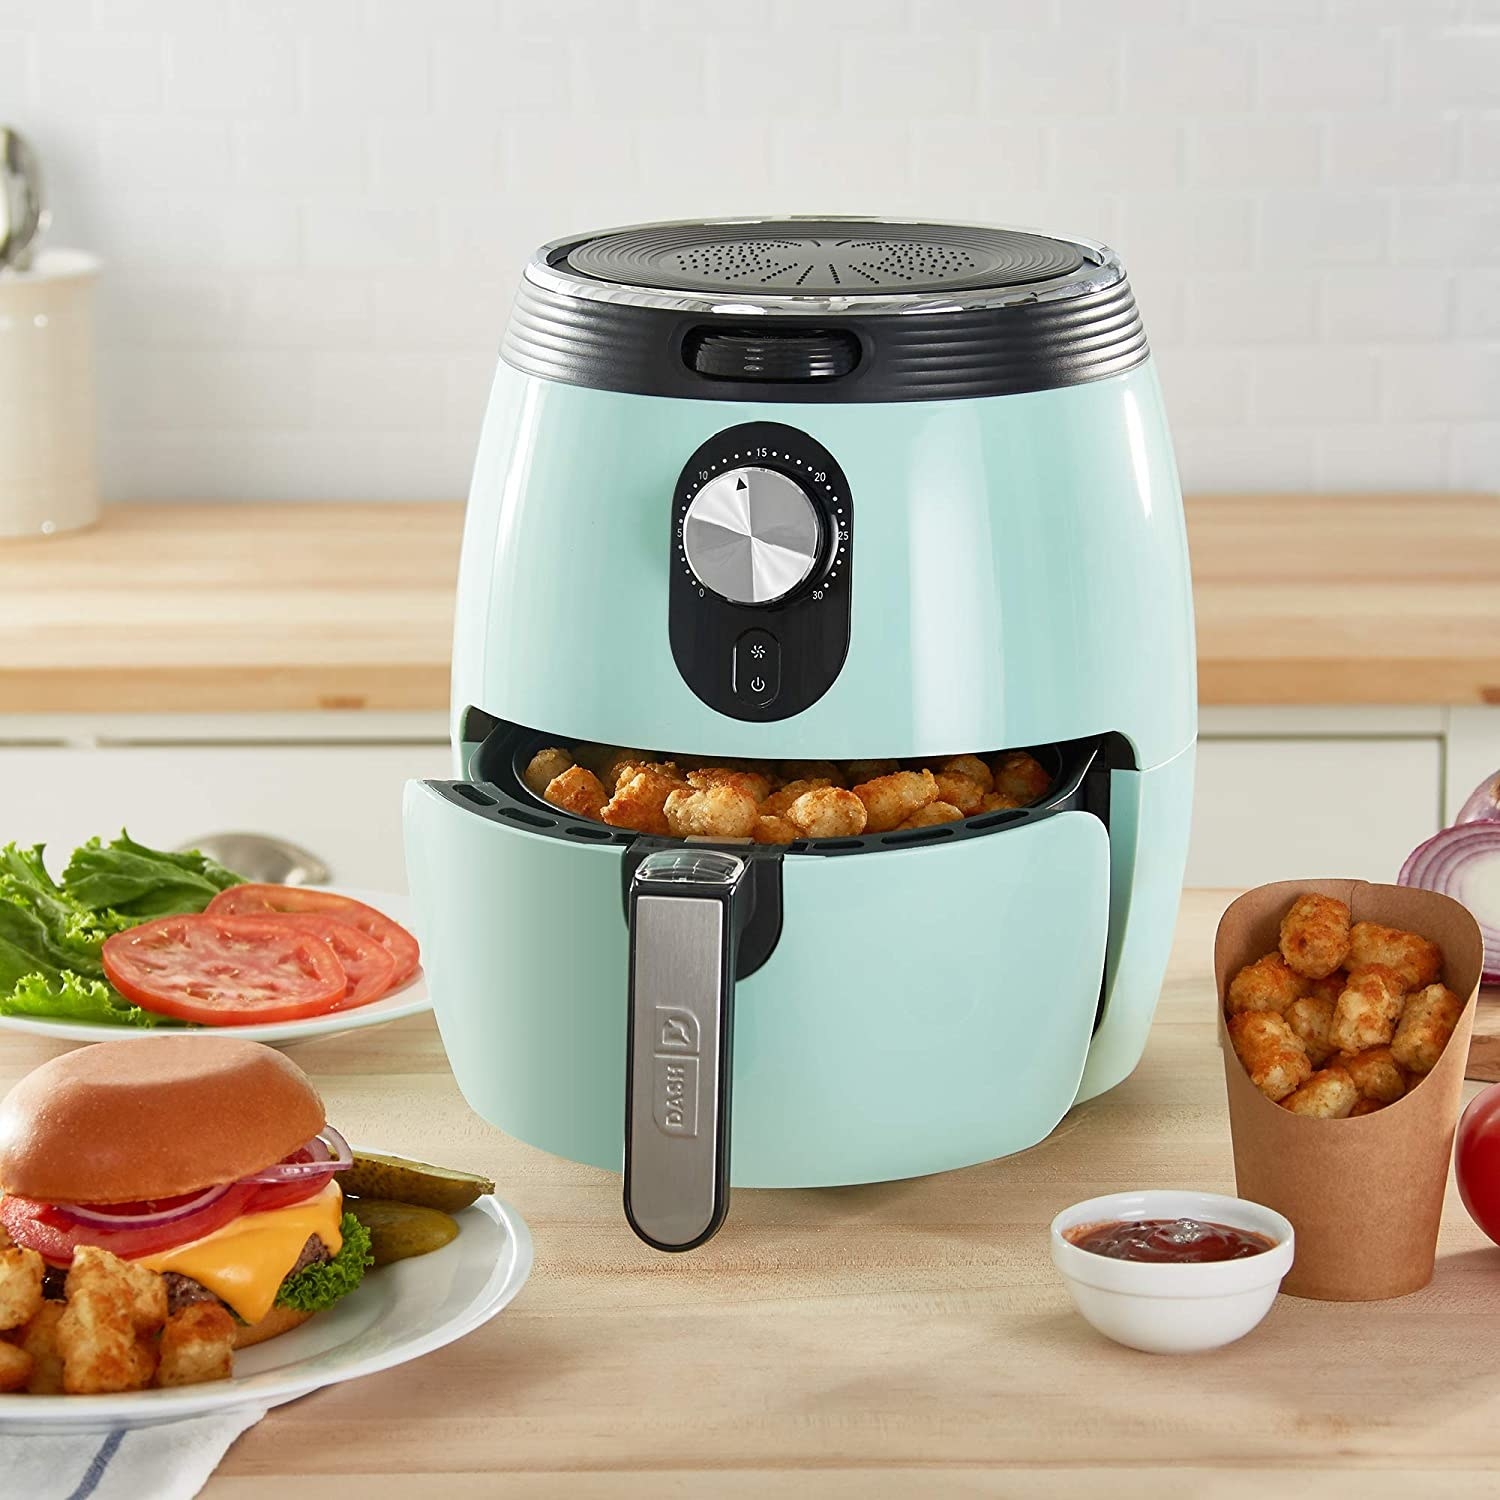 The air fryer in turquoise 